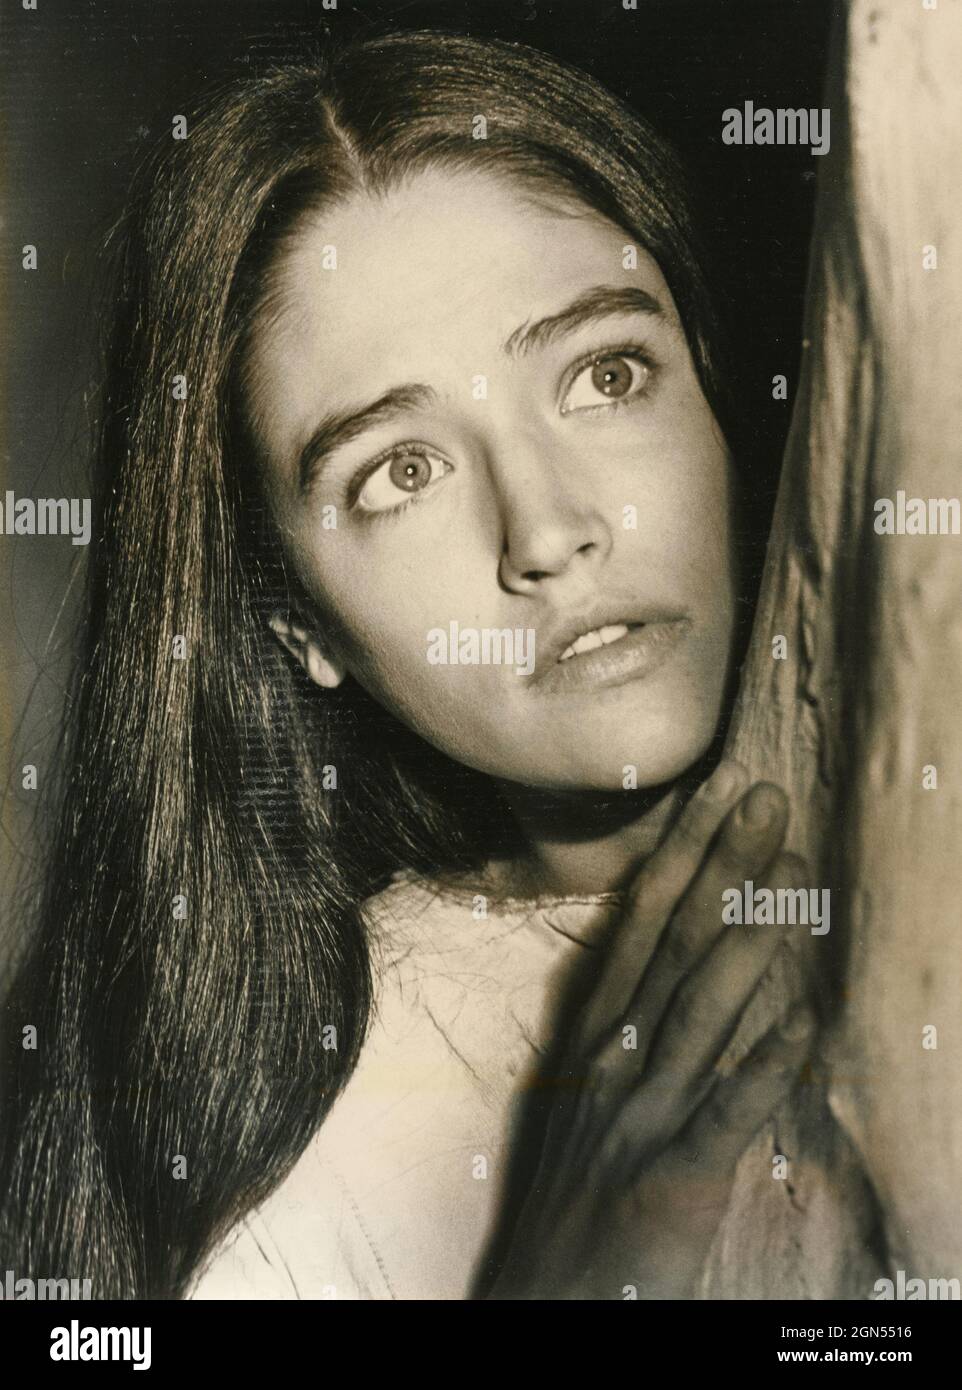 British actress Olivia Hussey in the movie Romeo and Juliet, 1979 Stock Photo